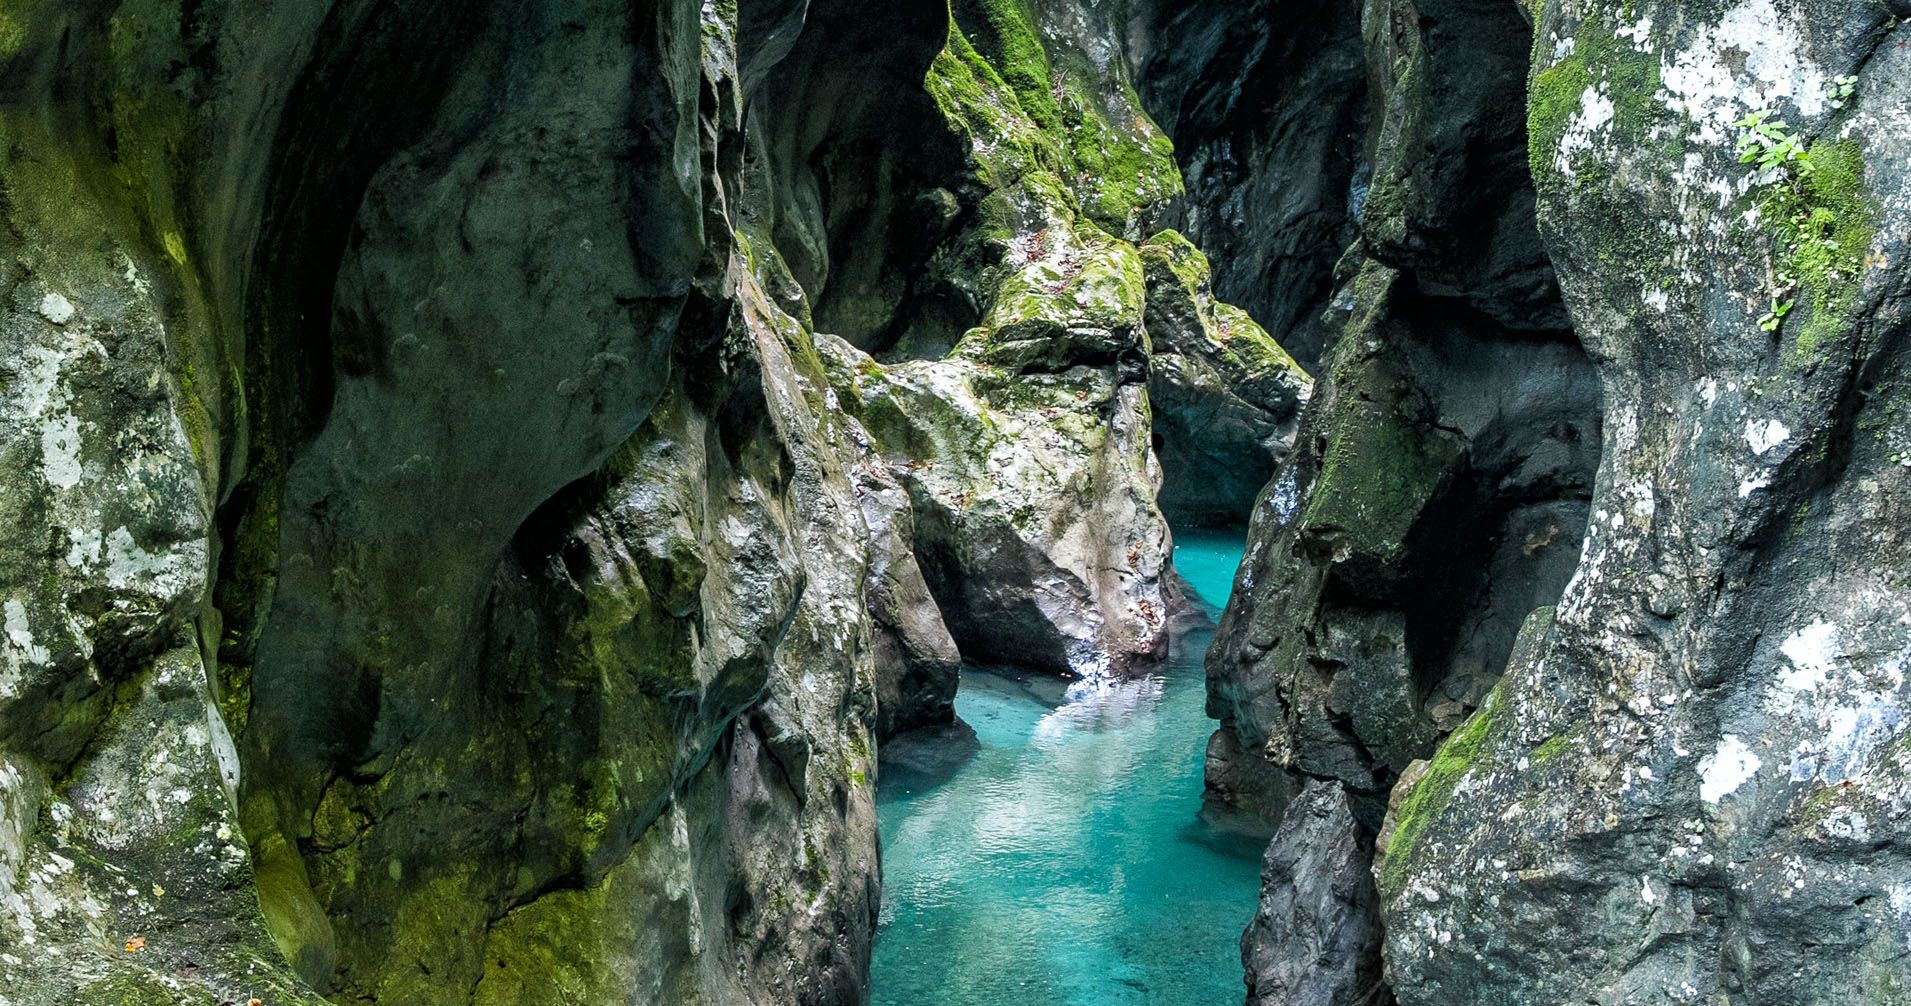 Featured image for “How to Visit Tolmin Gorge in Slovenia”